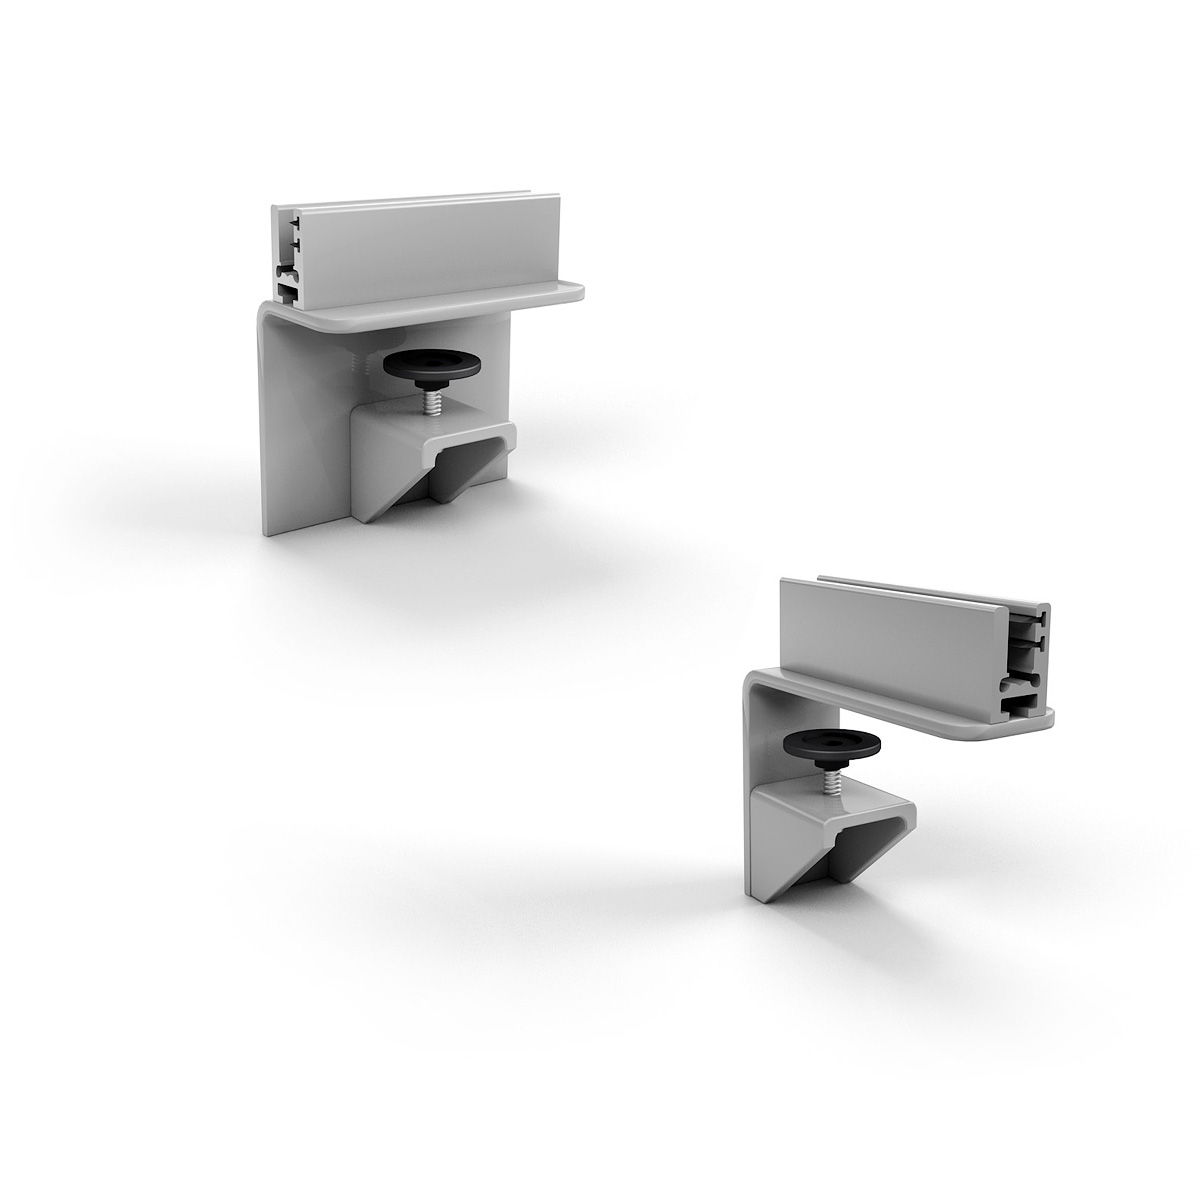 ACHOO Office Screens UK Perspex Desk Screen Clamps - For Use on Back And Side Of Desks And Tables